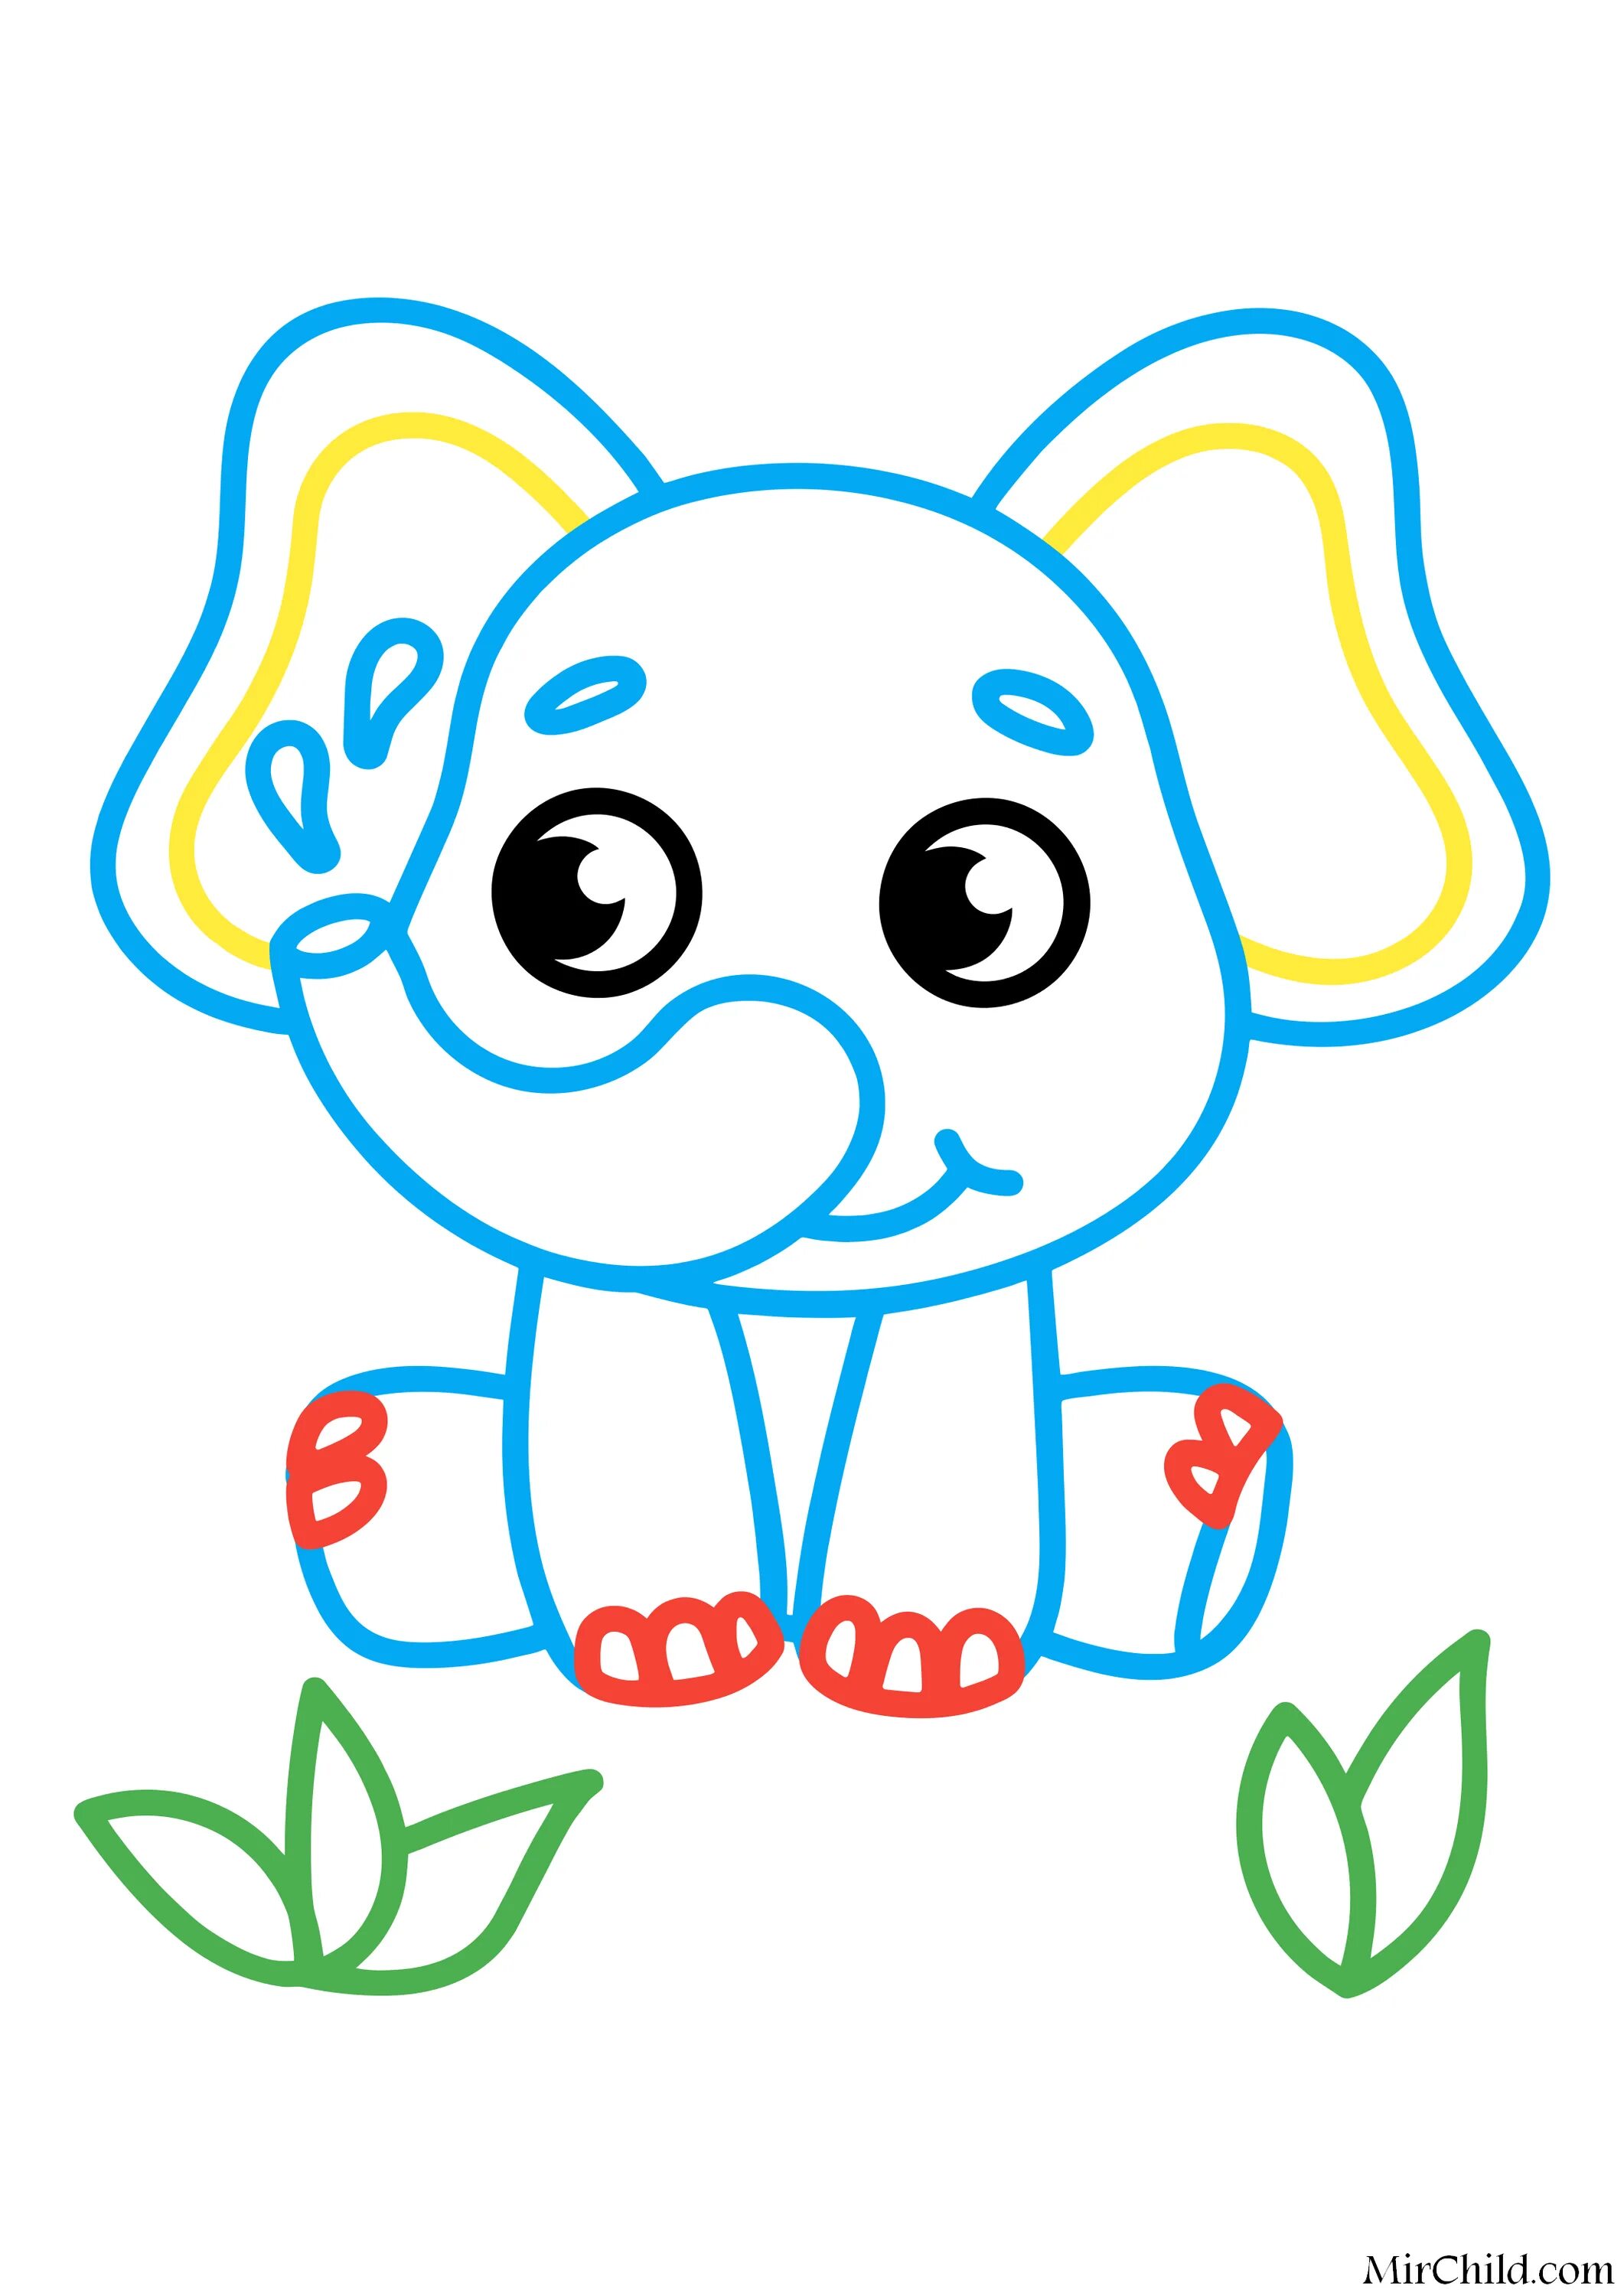 Toddler colored outline #1